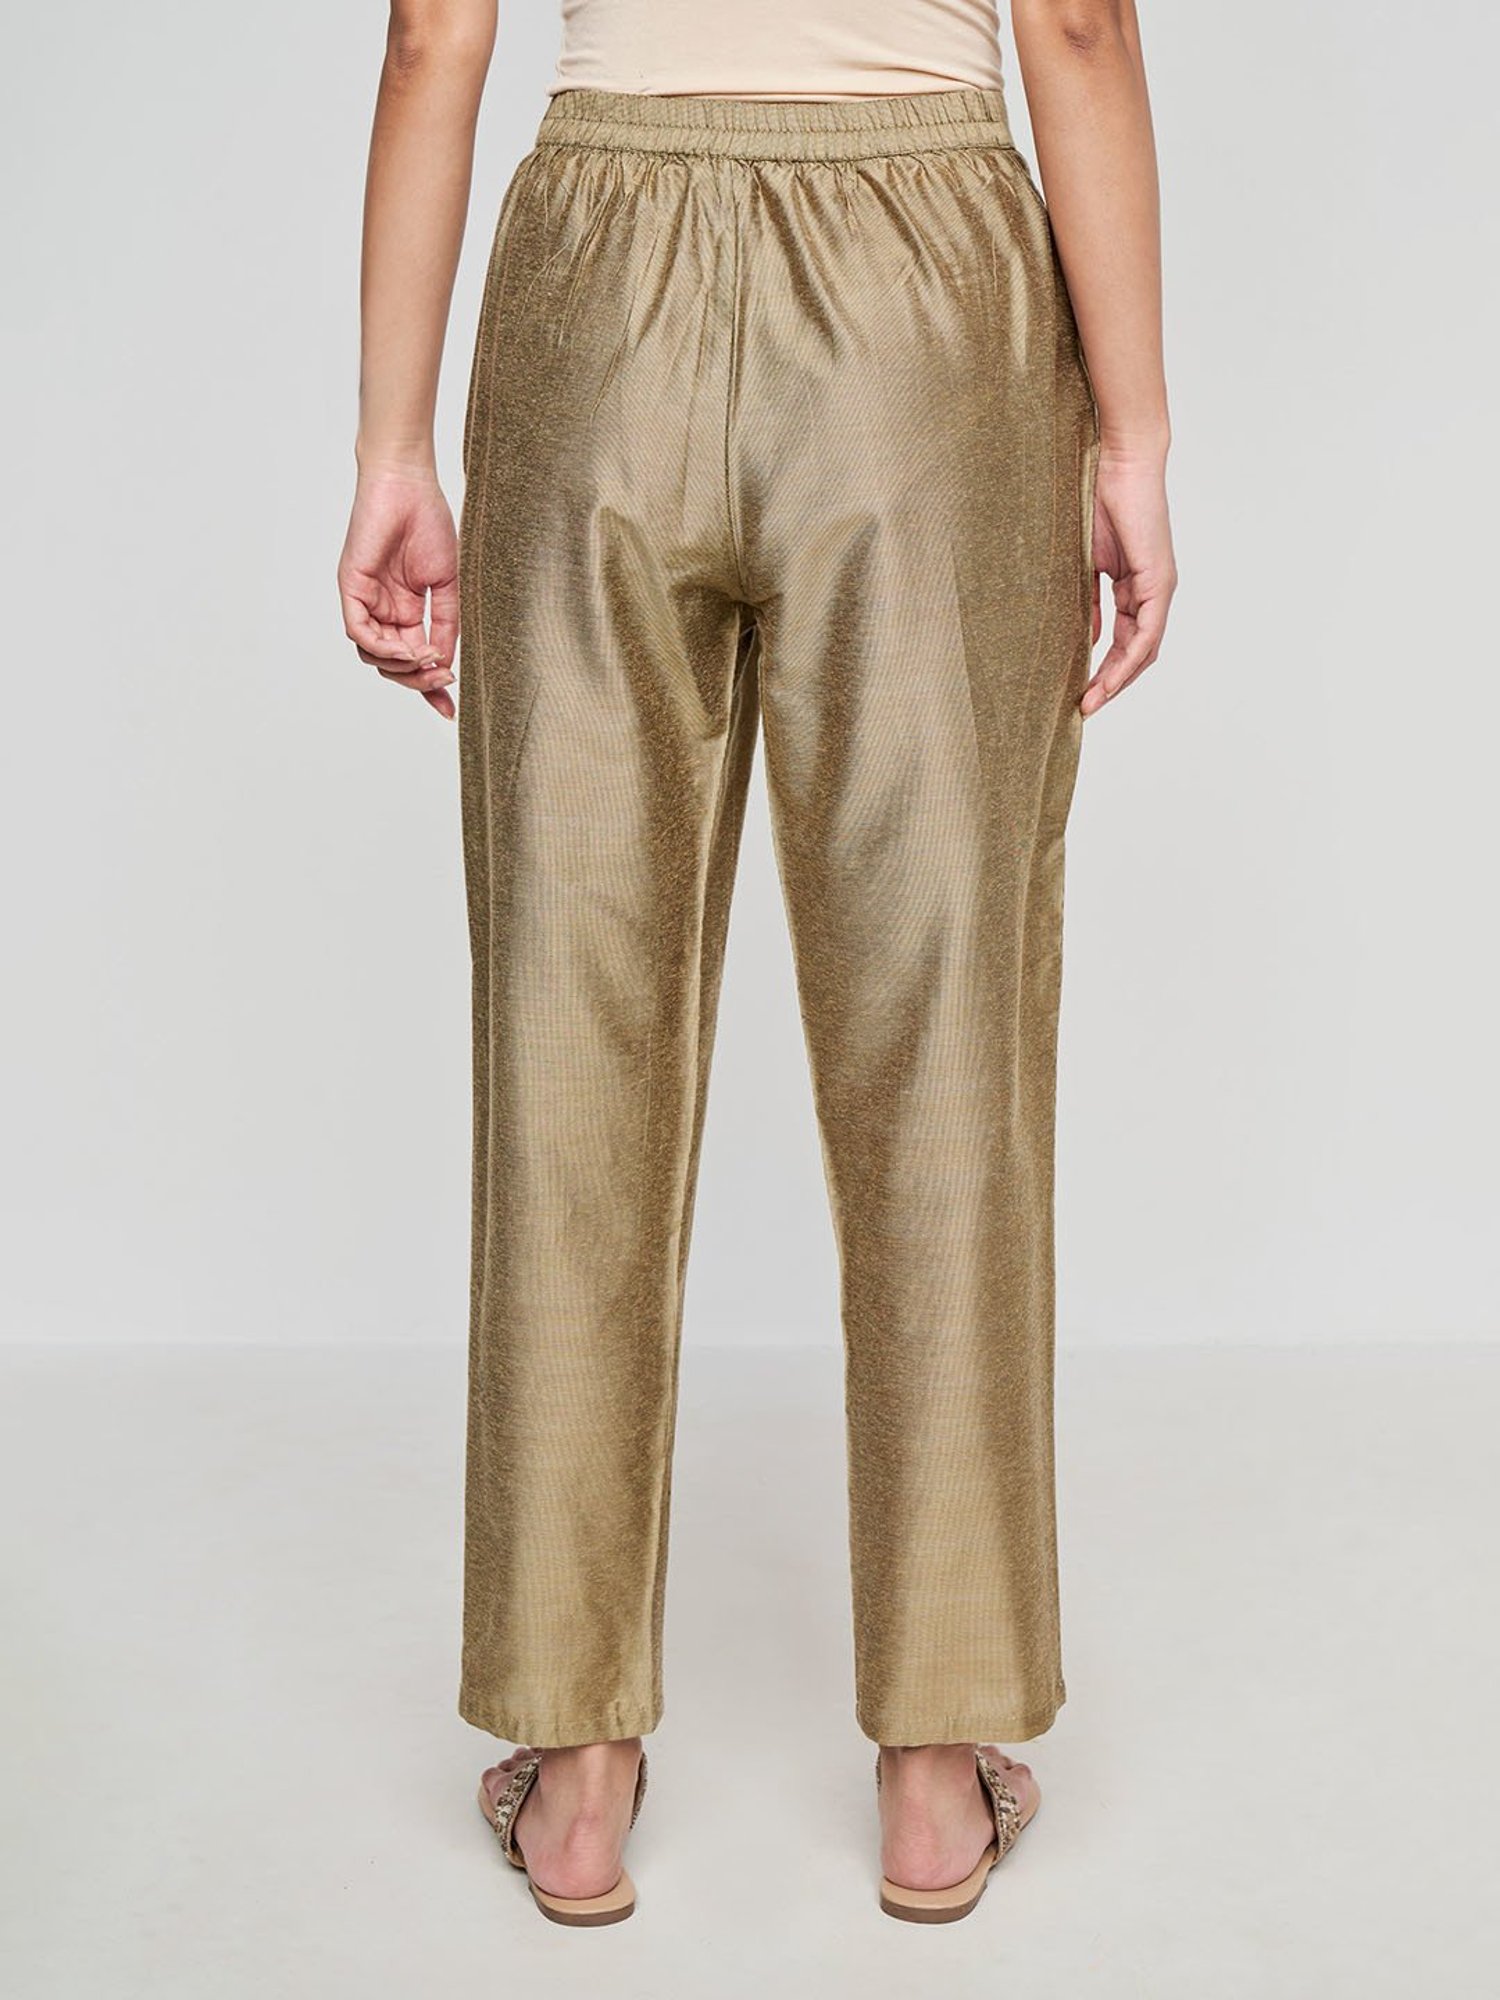 Buy Online Gold Metallic Cotton Pants for Women  Girls at Best Prices in  Biba IndiaBOTTOMW16492AW2